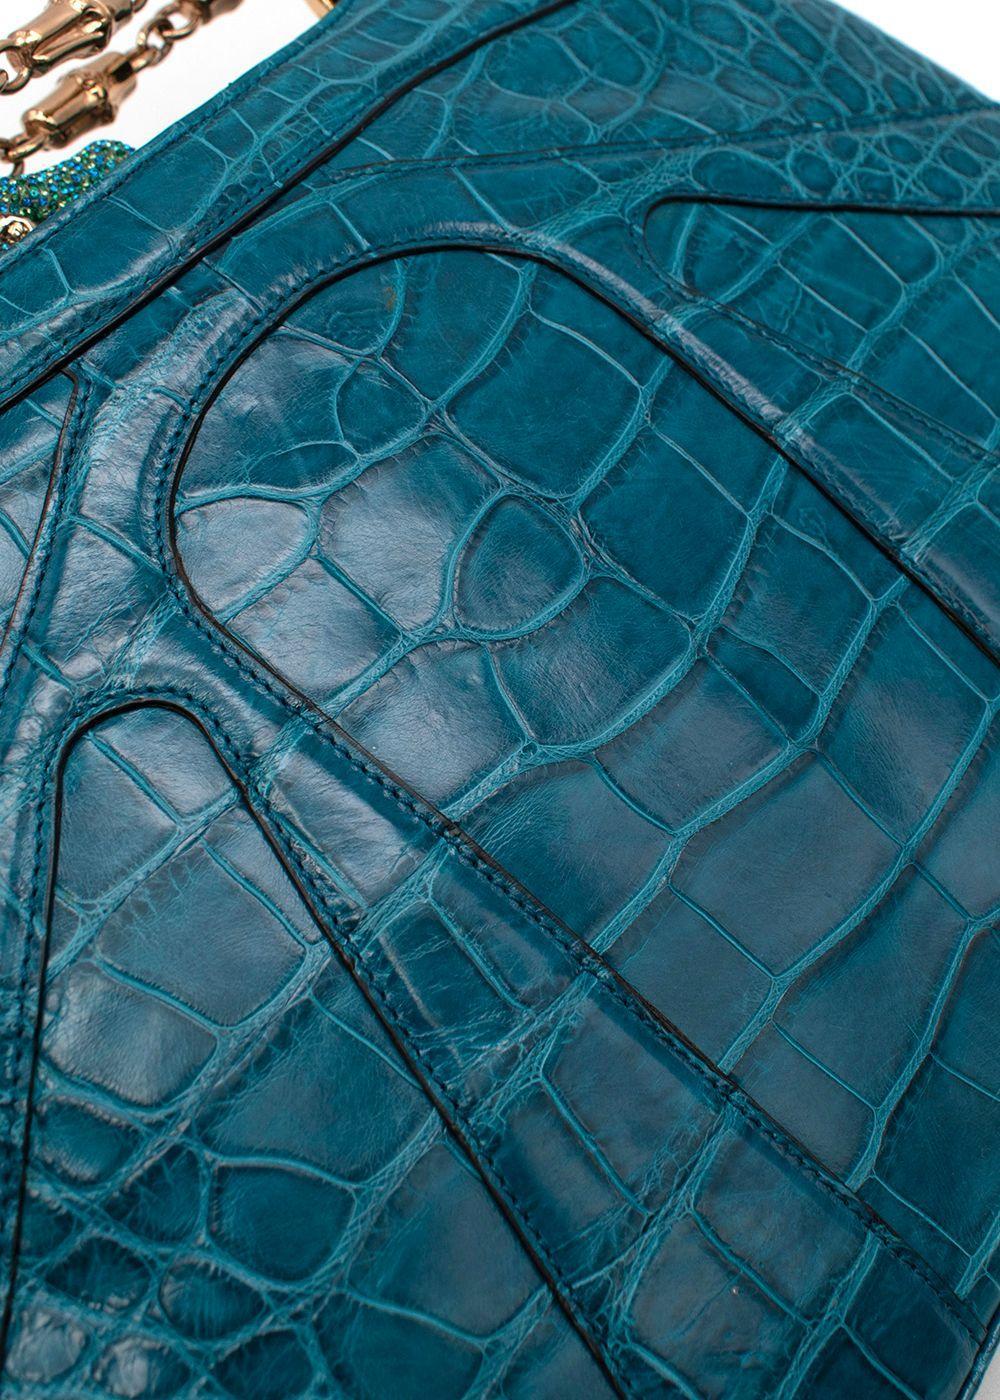 2004 Vintage Iconic Tom Ford for Gucci teal crocodile bag 5